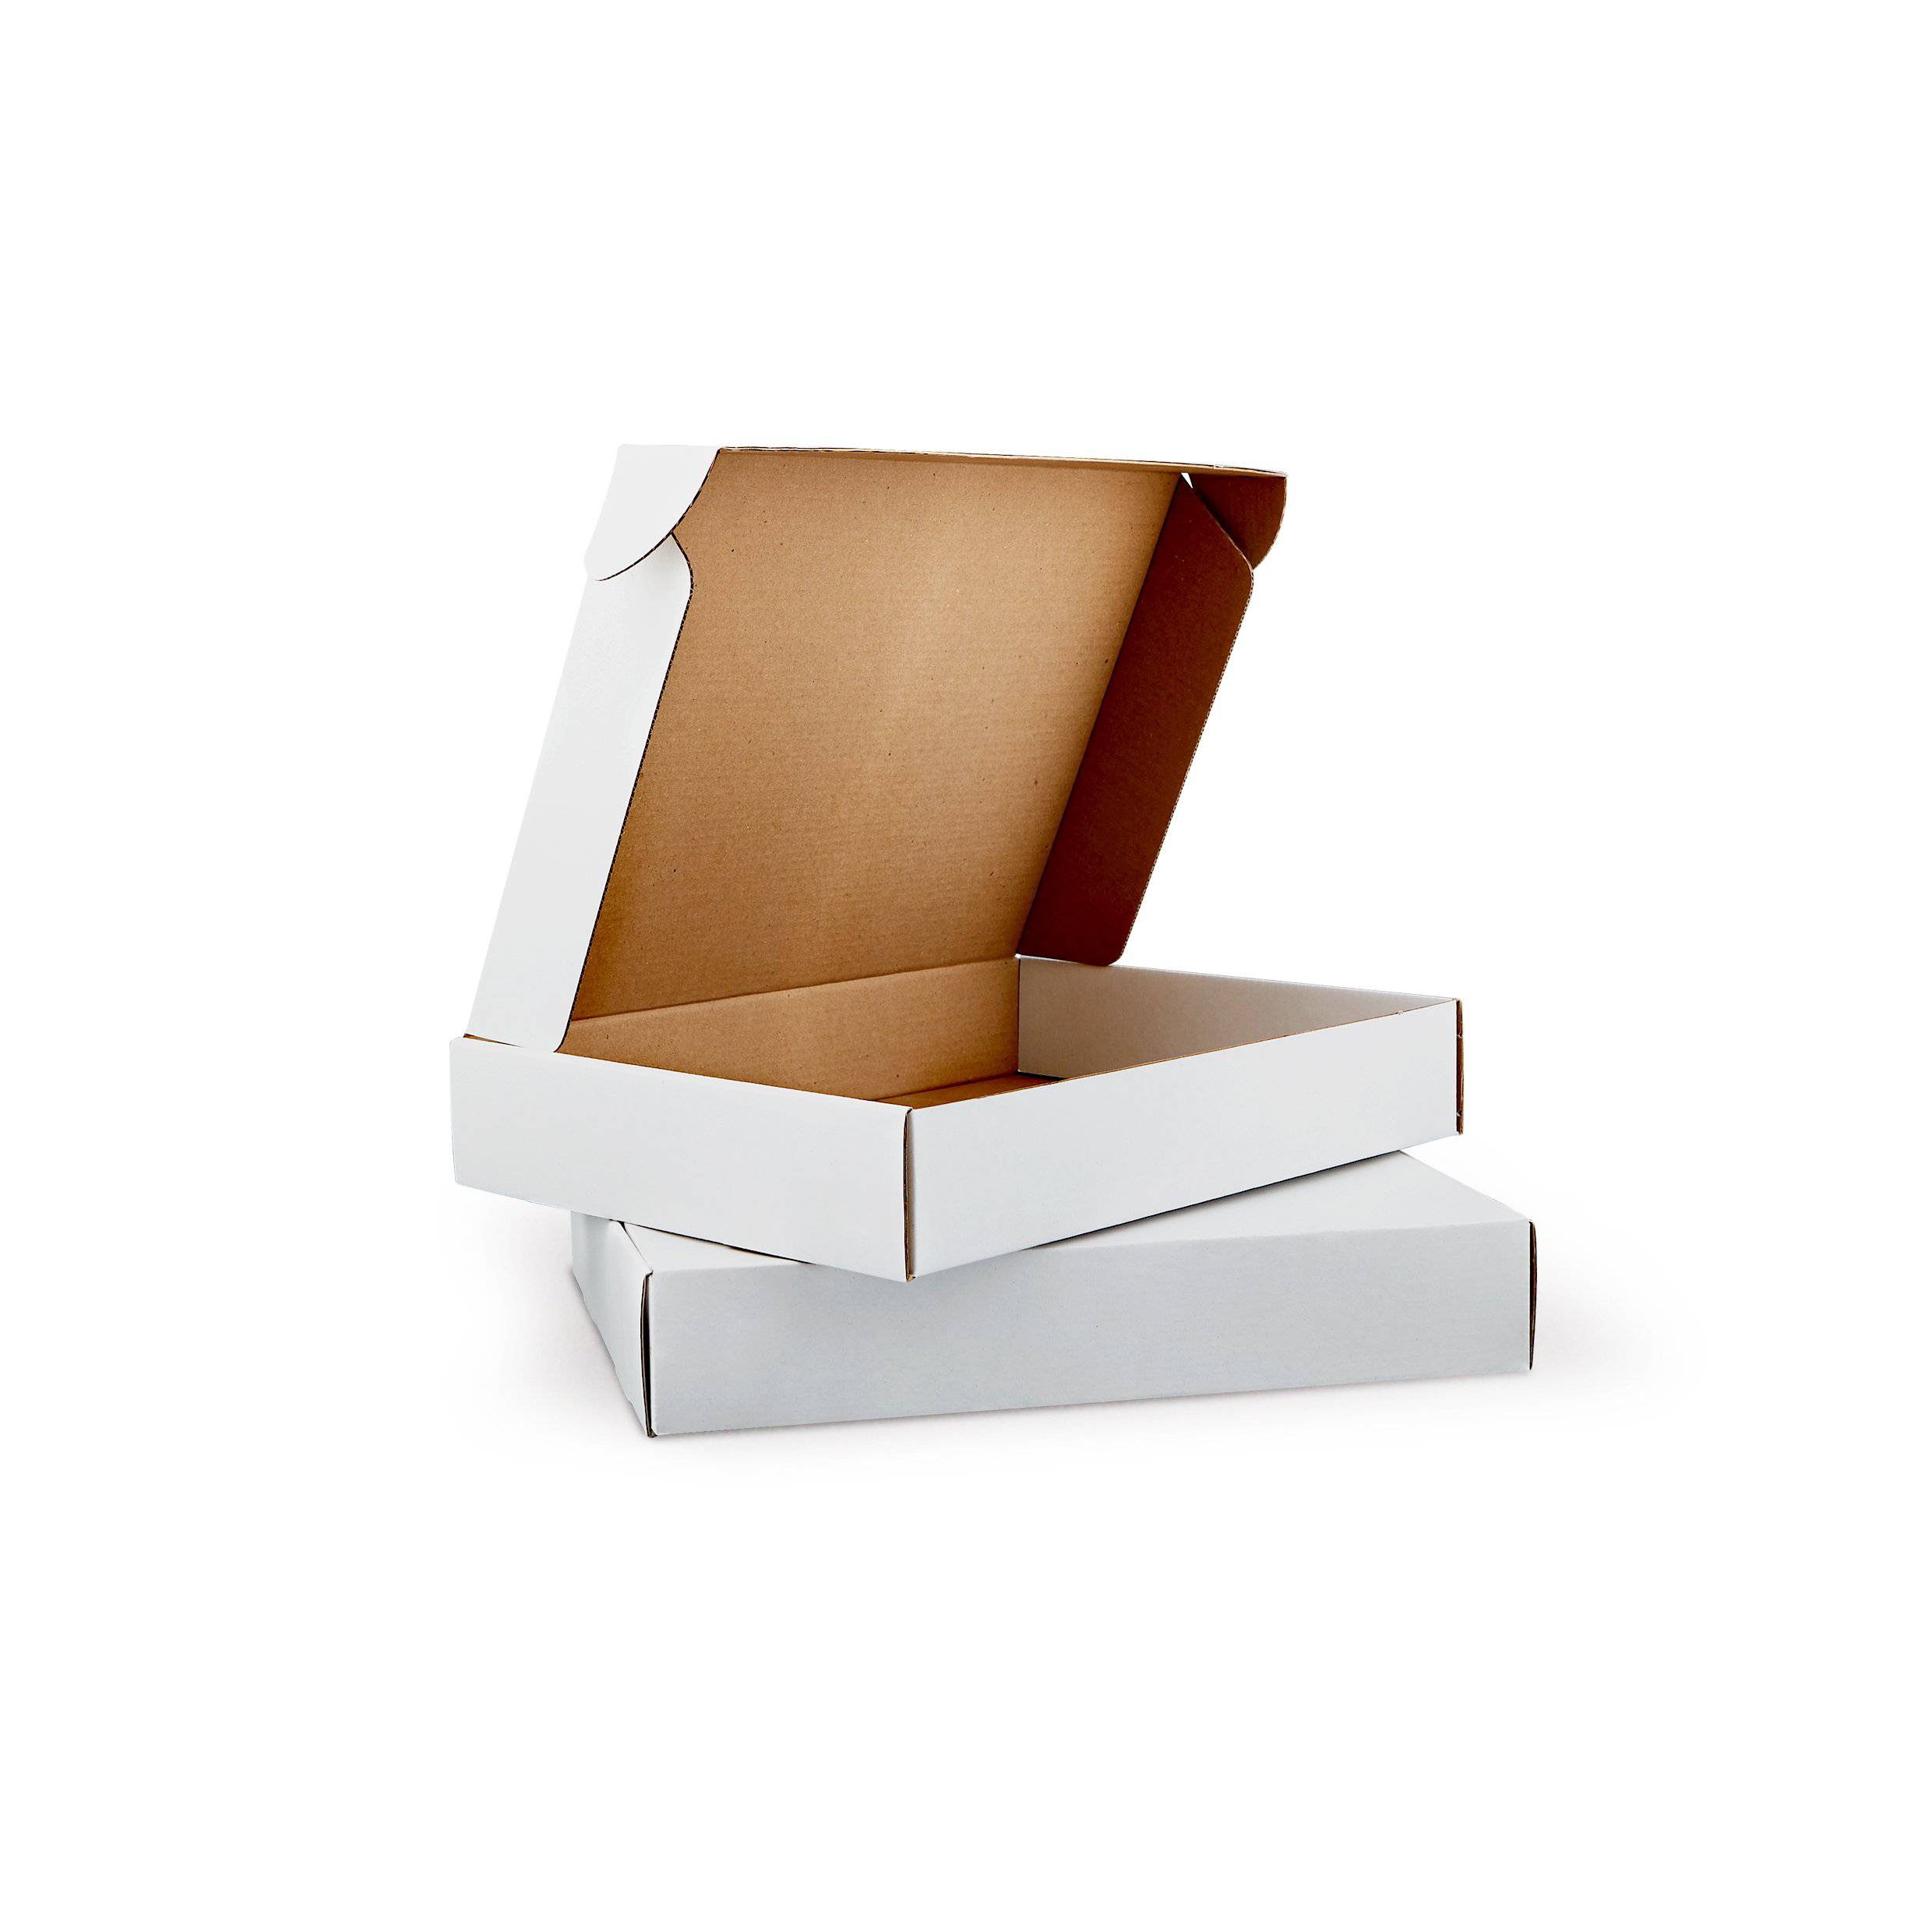 5 Pieces Multipurpose cardboard corrugated shipping box - Hotpack Global